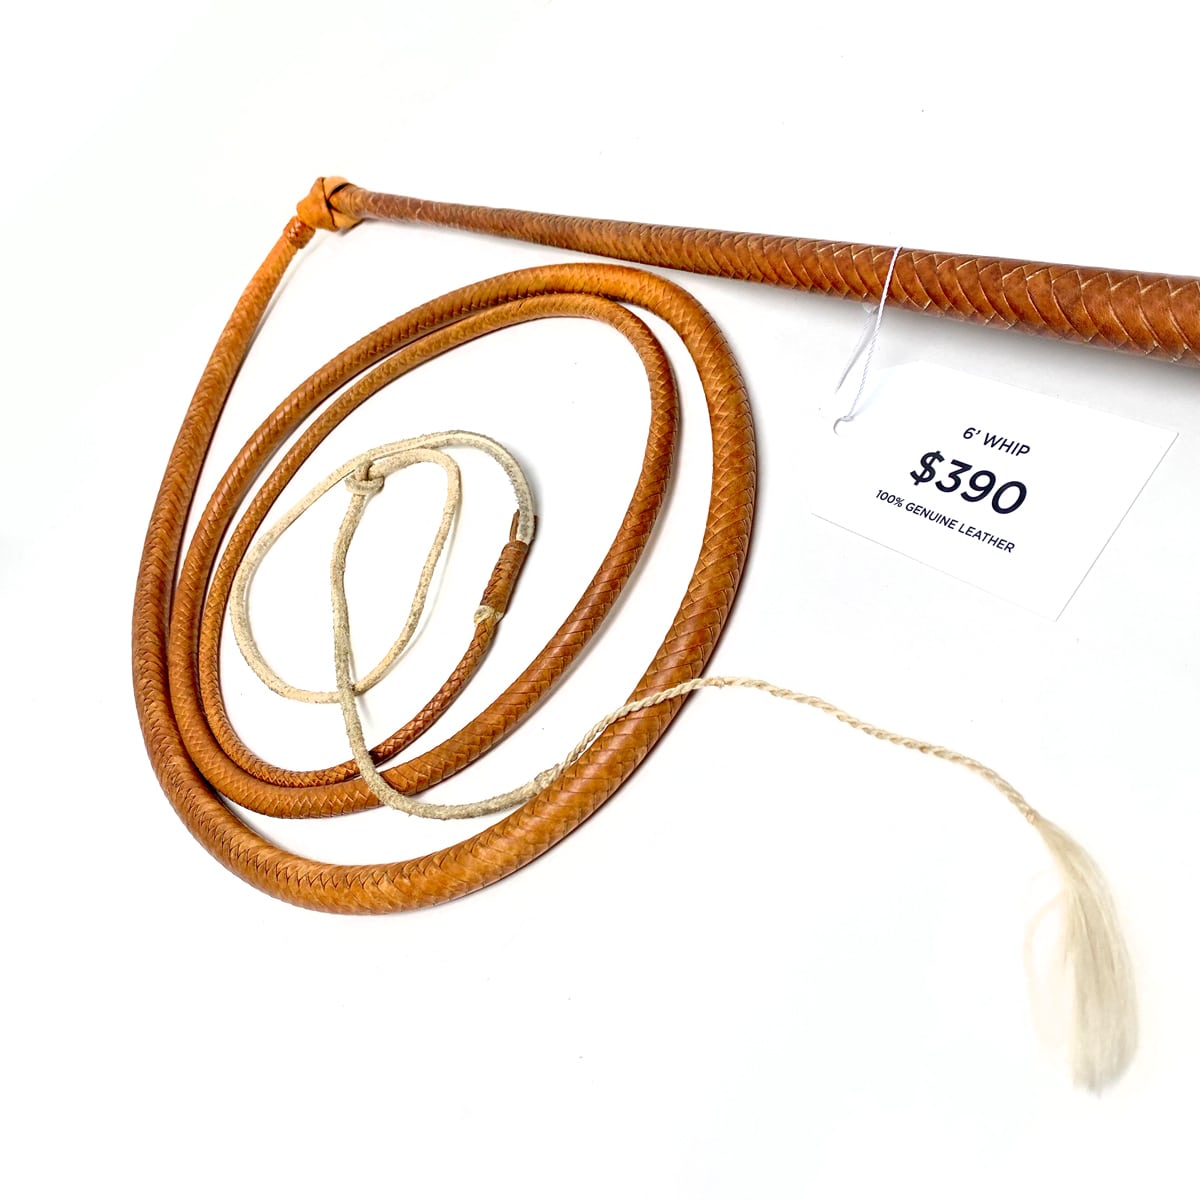 6' Leather Whip